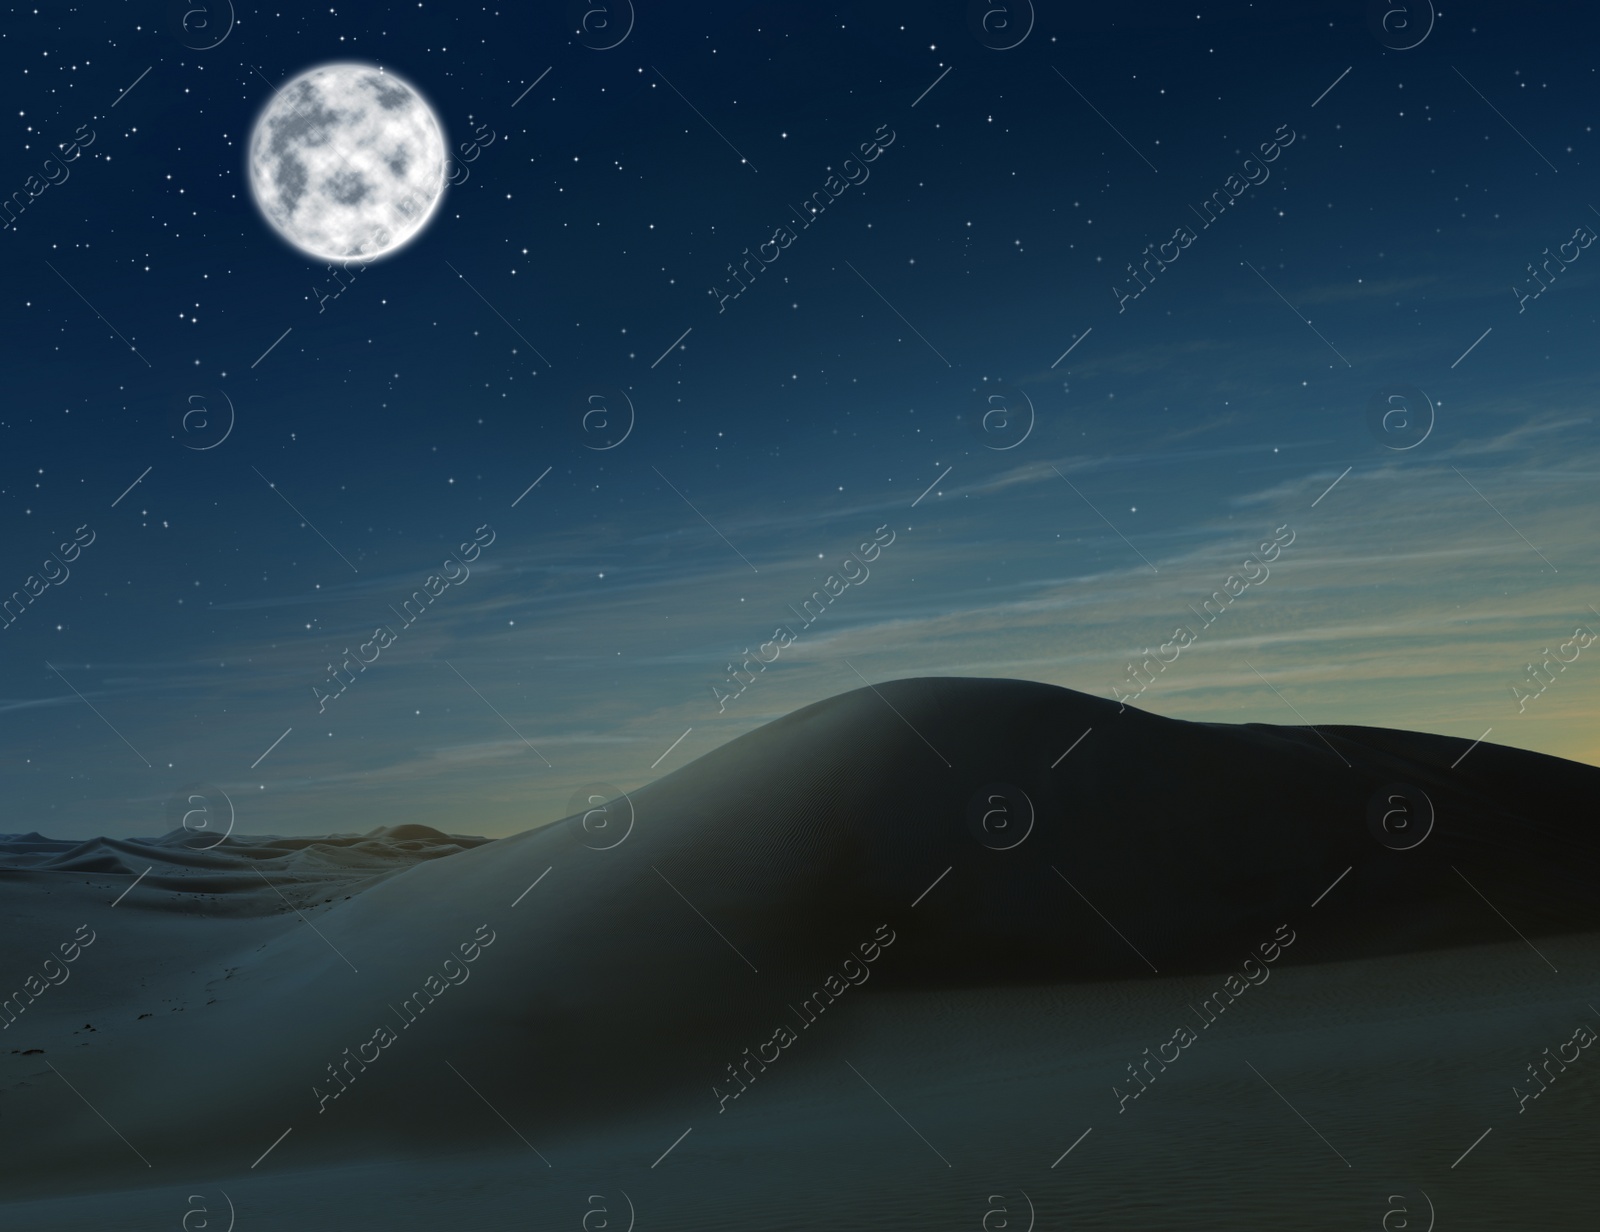 Image of Scenic view of sandy desert under starry sky with full moon in night 